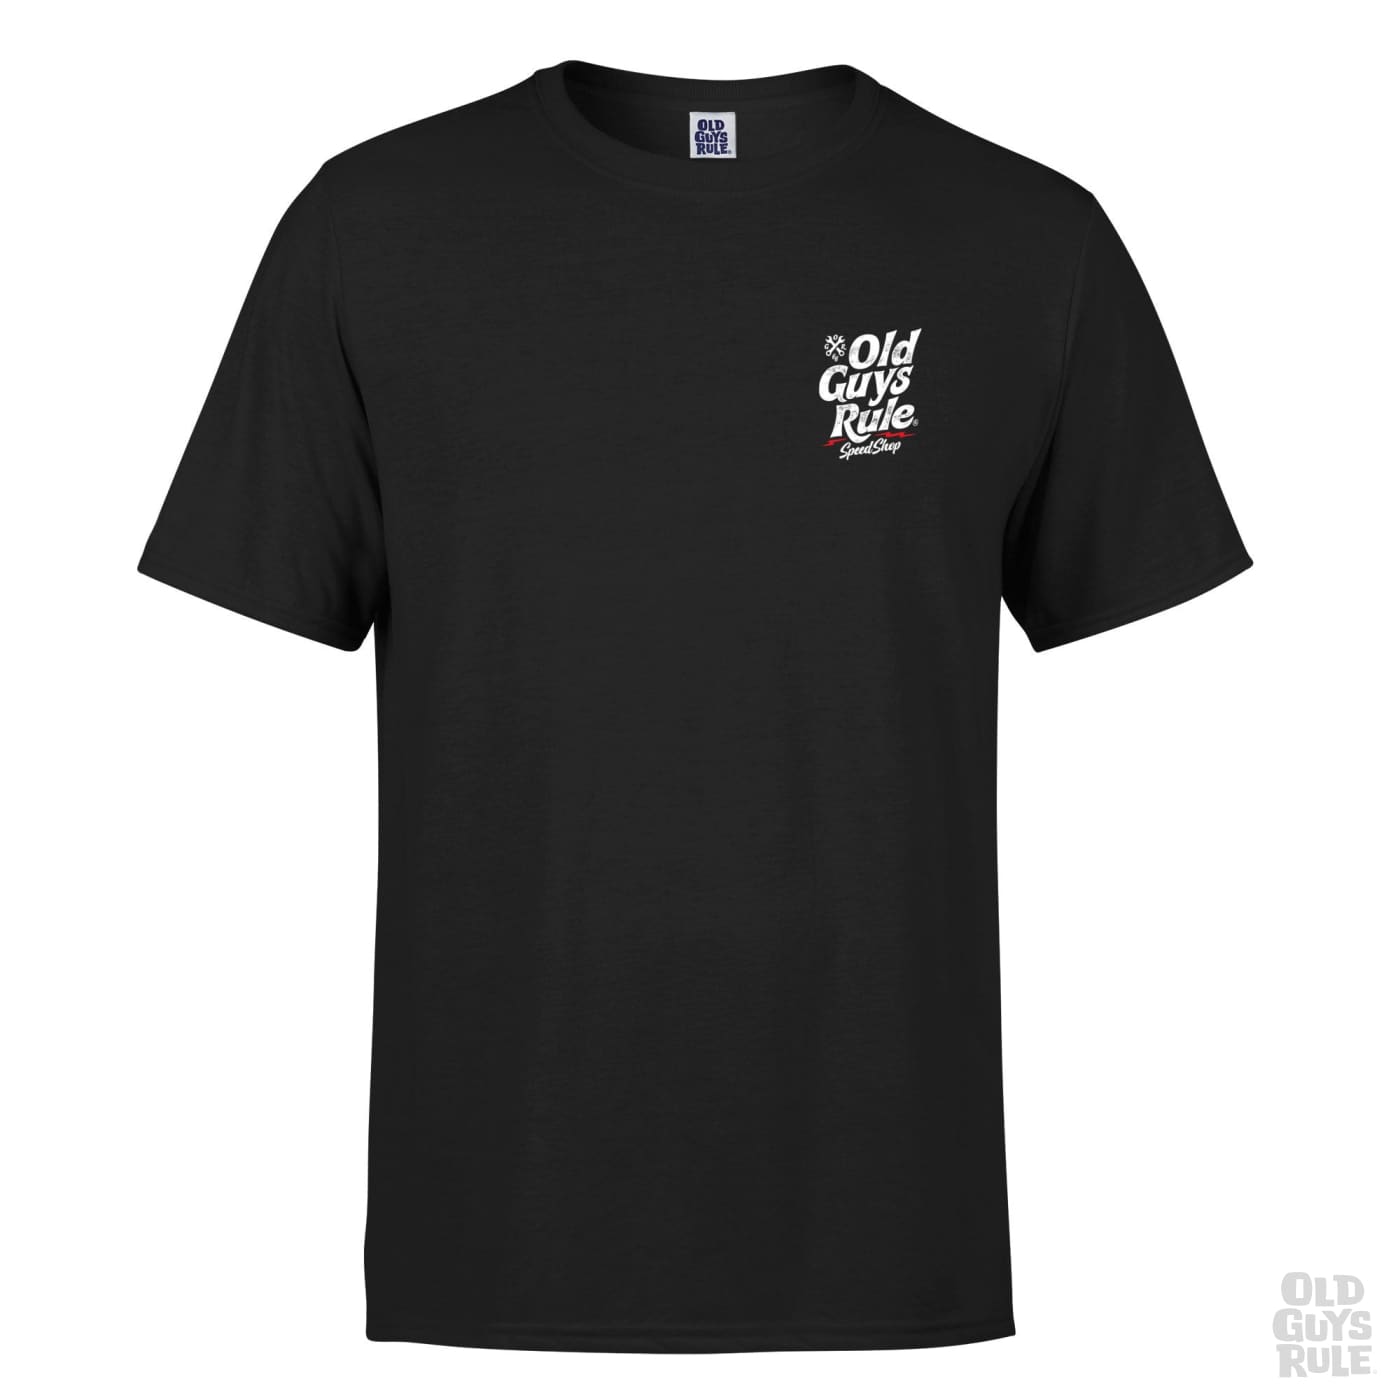 Old Guys Rule Speed Shop T-Shirt - Black